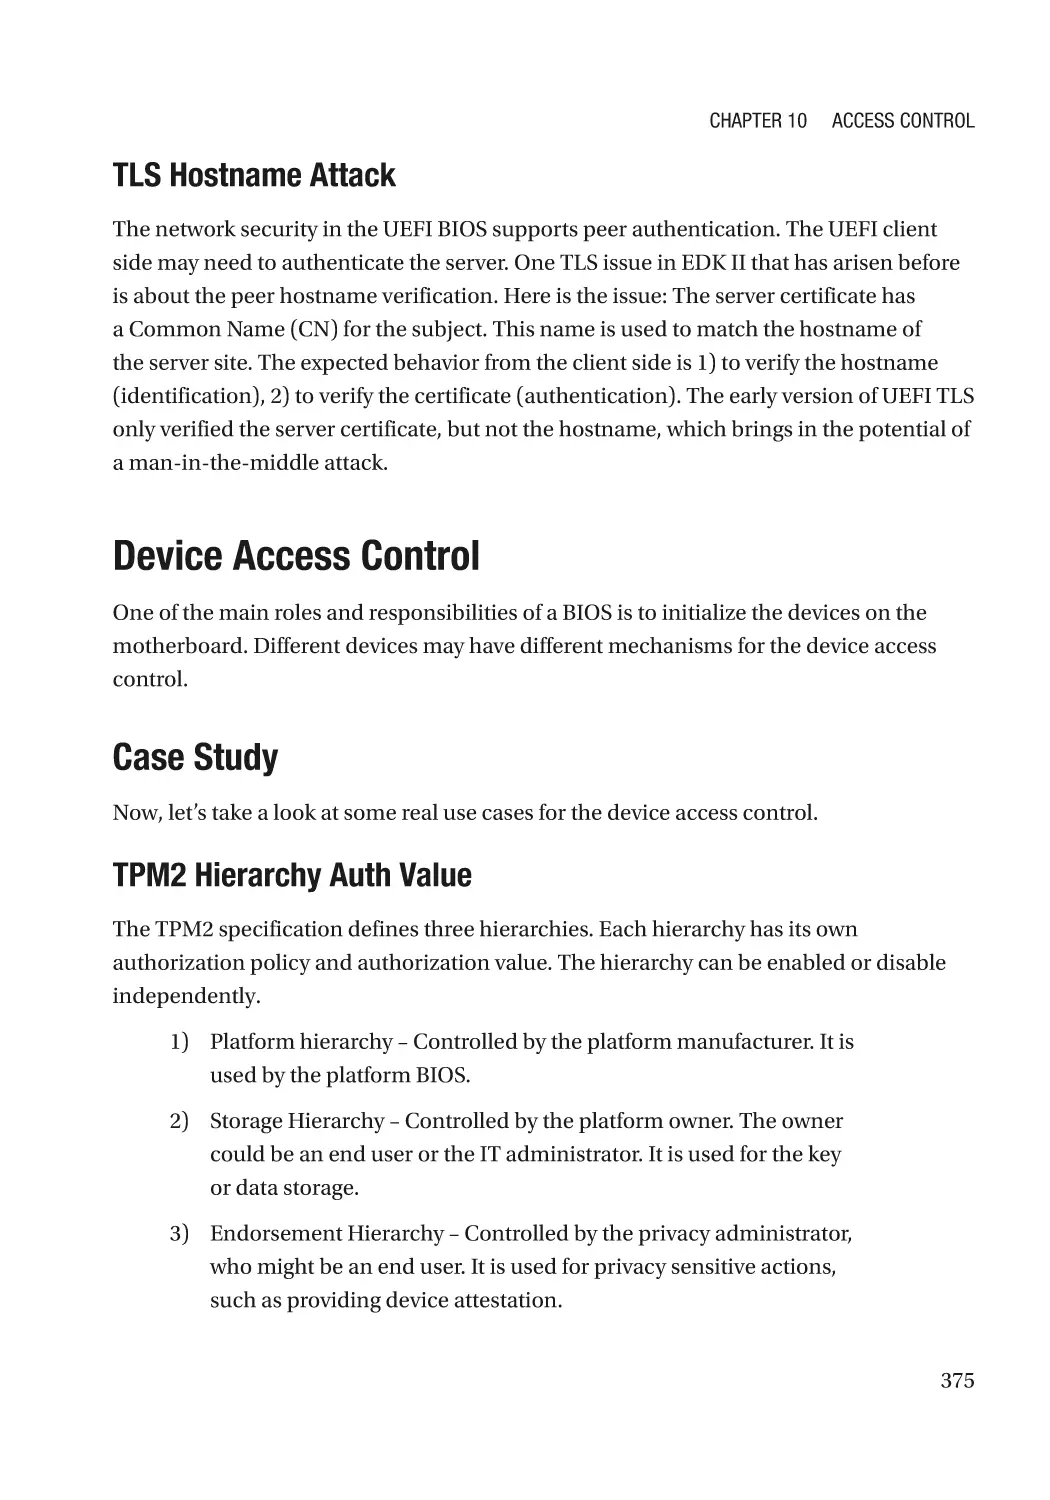 TLS Hostname Attack
Device Access Control
Case Study
TPM2 Hierarchy Auth Value